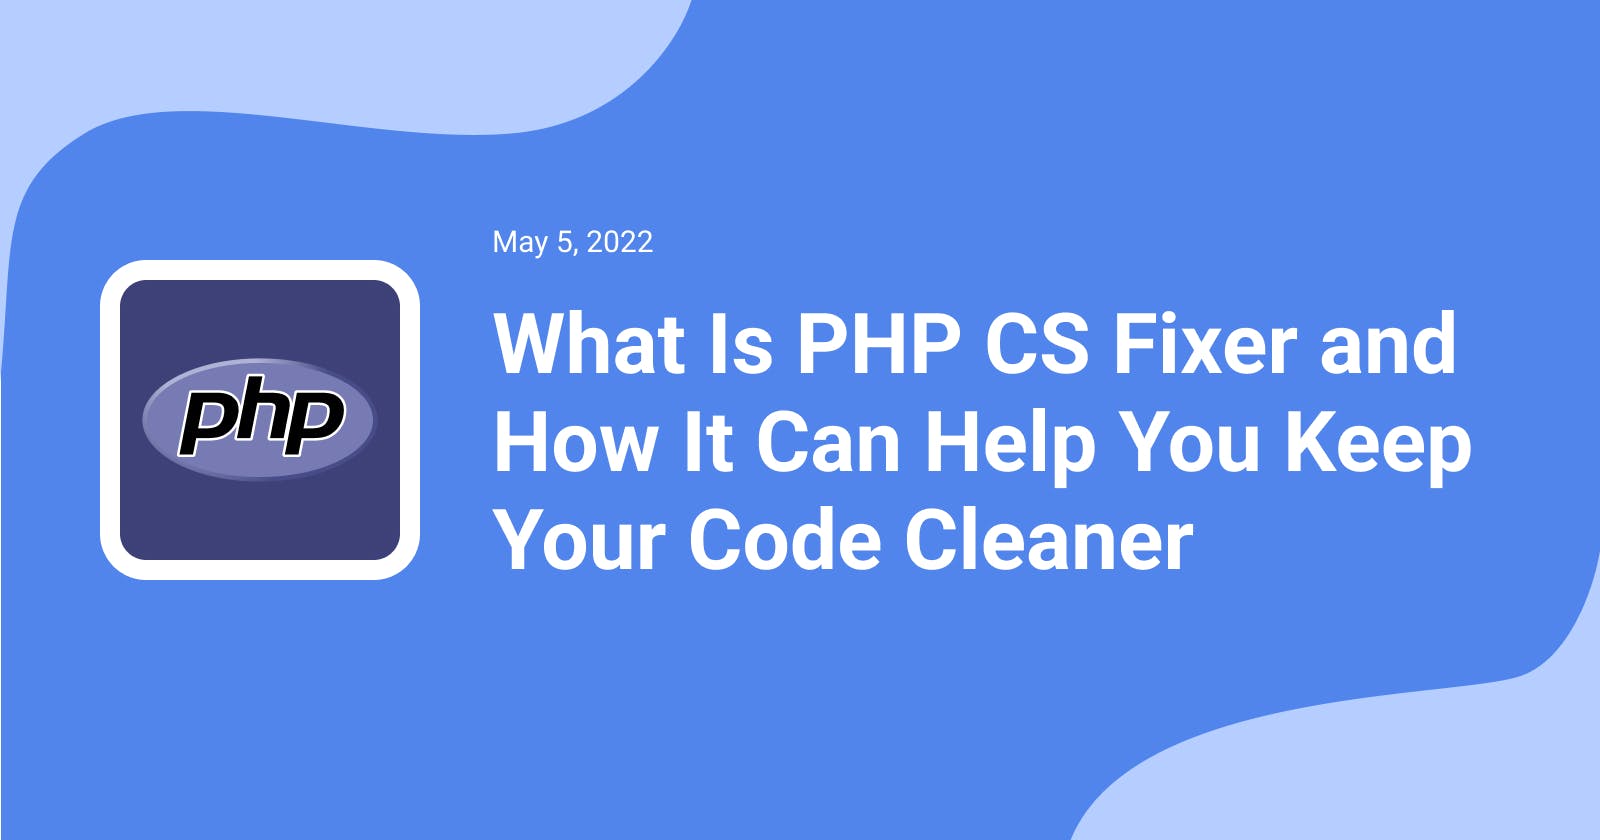 What Is PHP CS Fixer and How It Can Help You Keep Your Code Cleaner